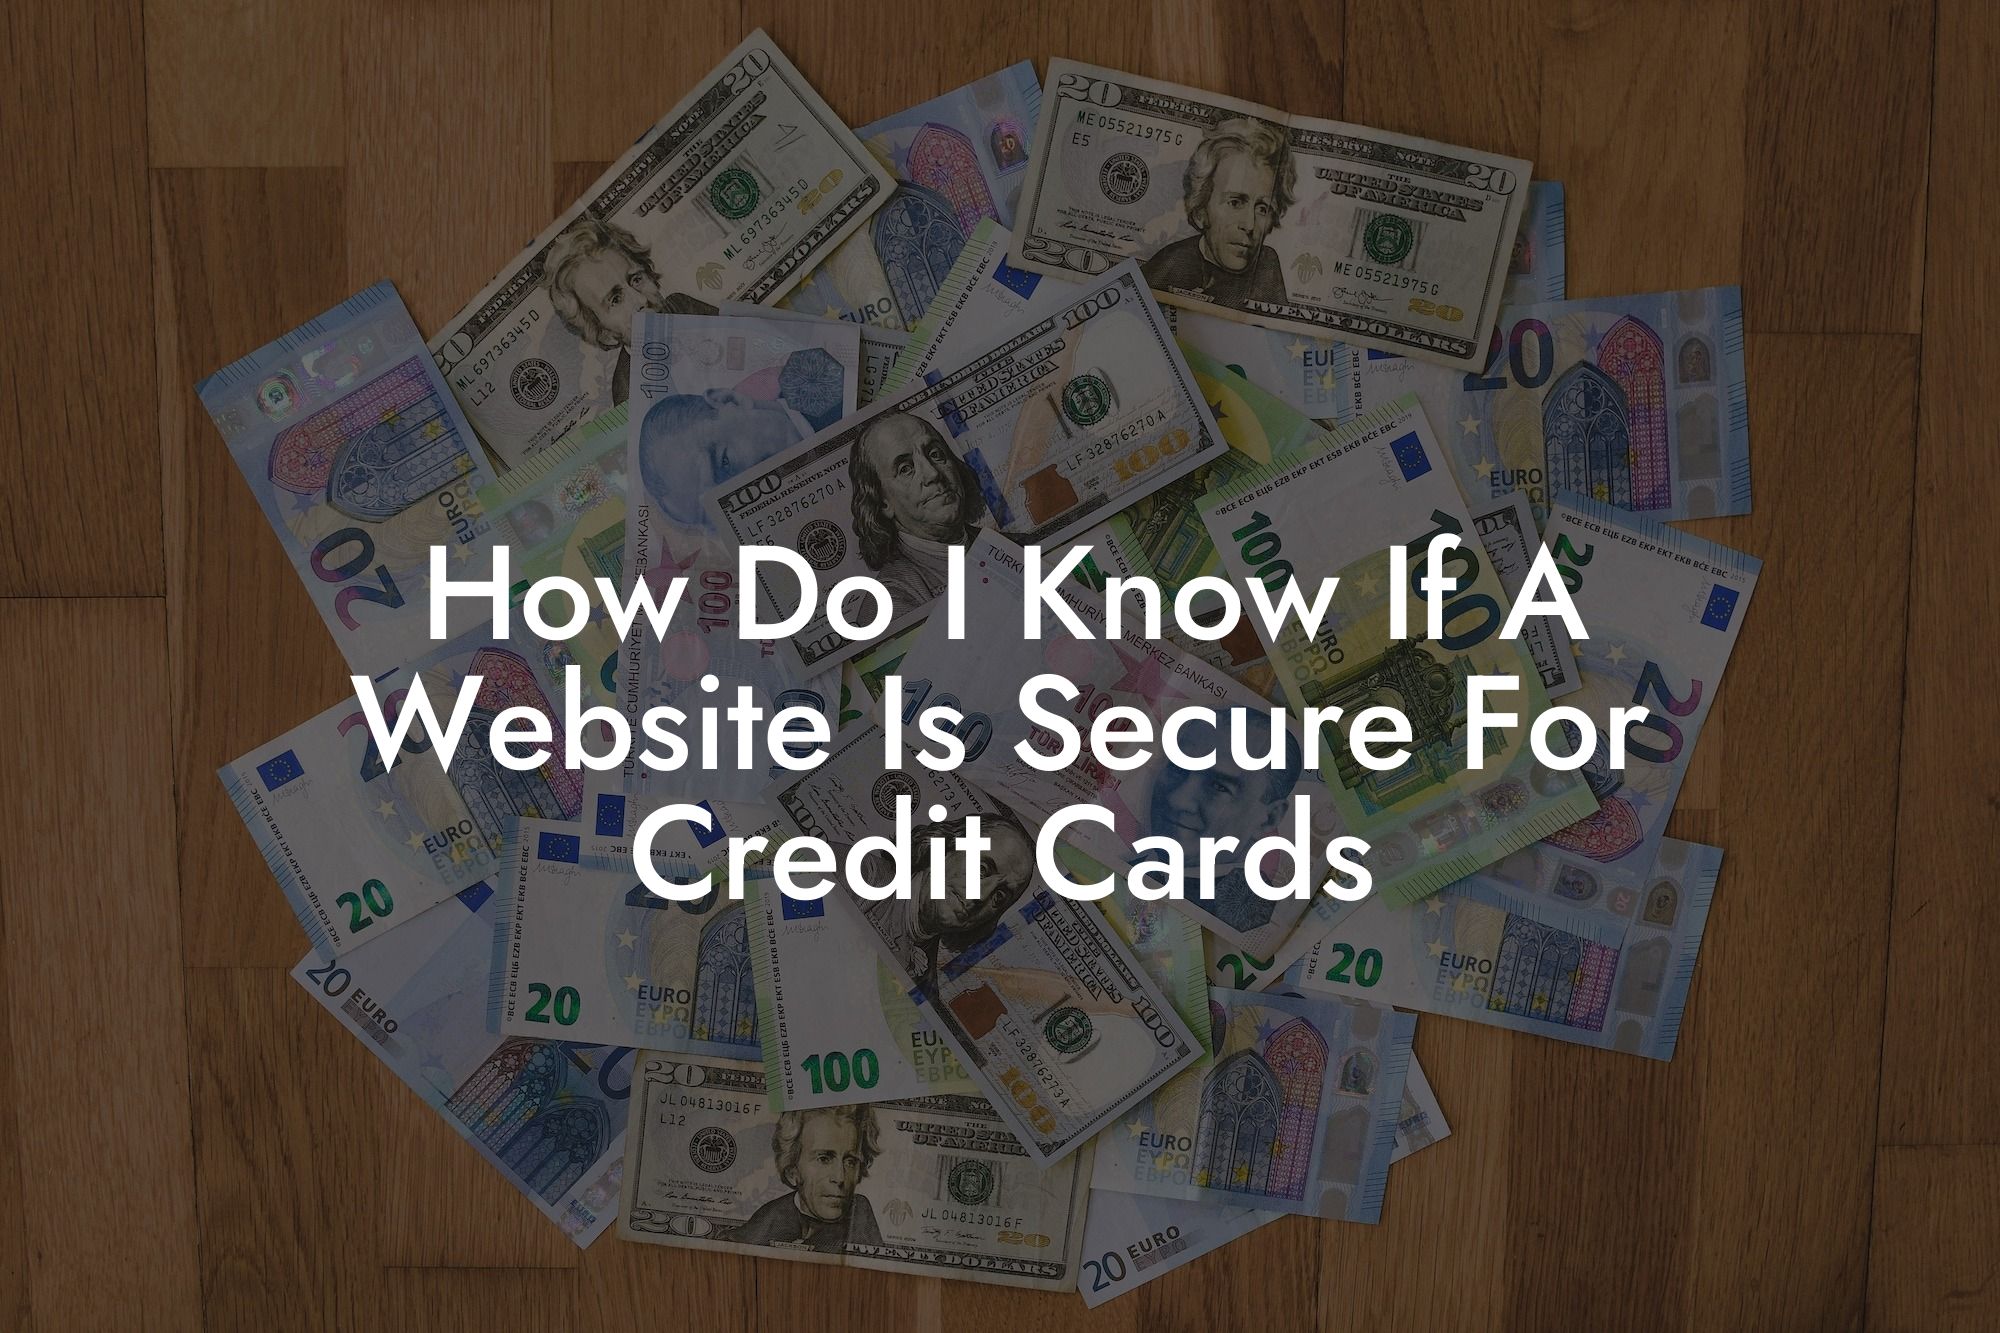 How Do I Know If A Website Is Secure For Credit Cards